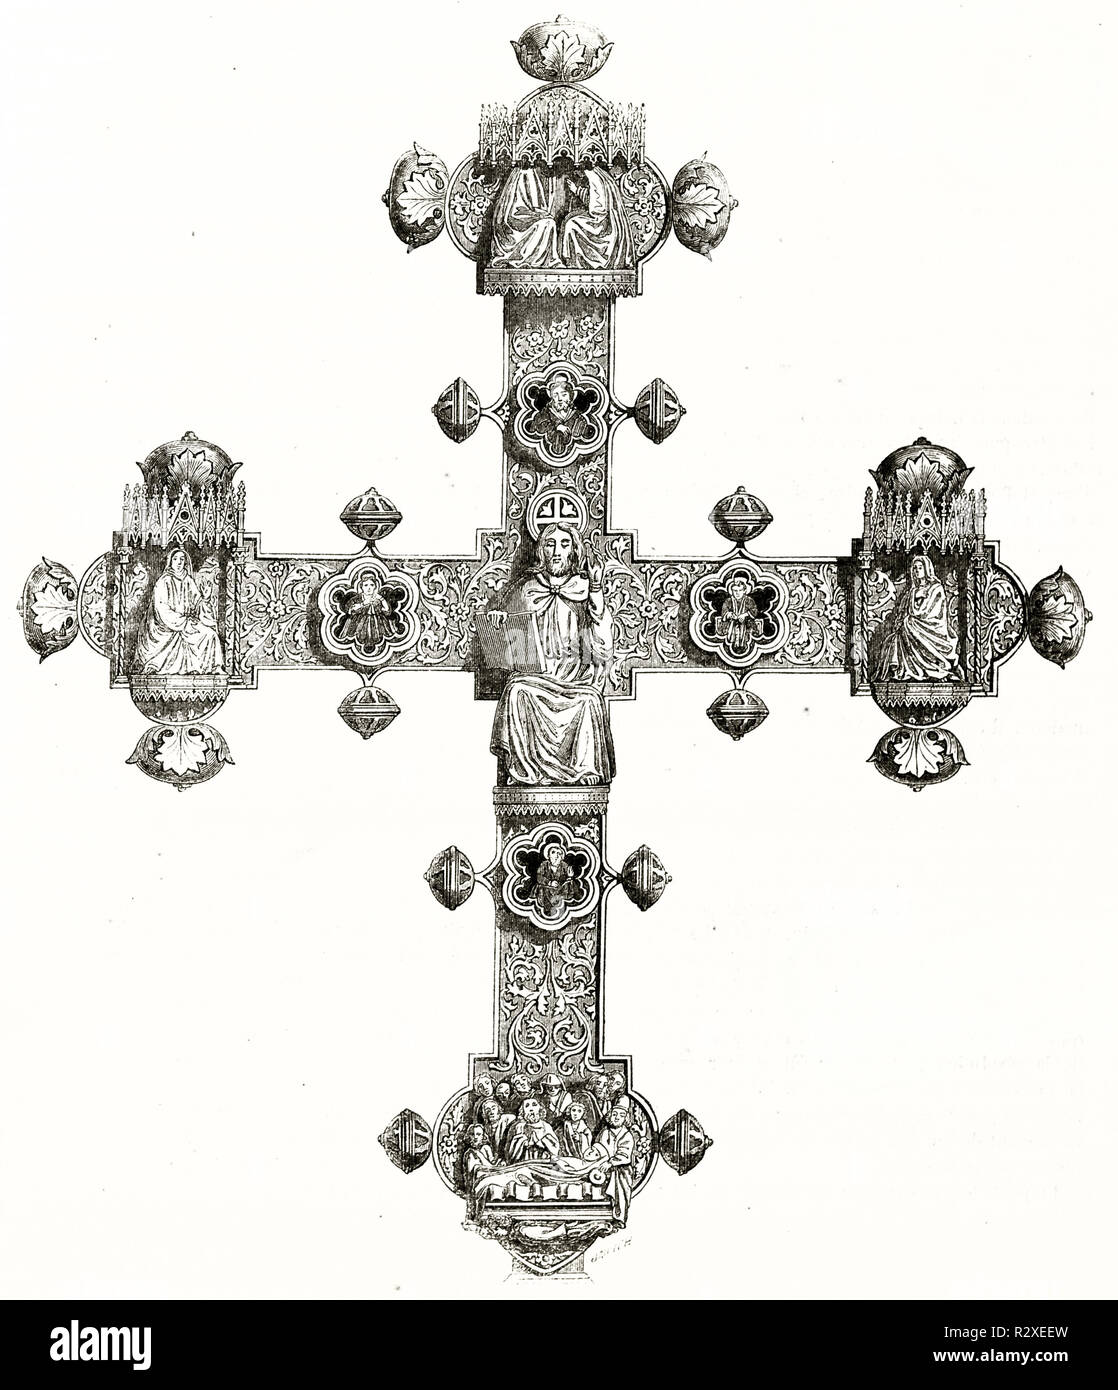 Old illustration of Lanciano cross backside. By unidentified author, publ. on Magasin Pittoresque, Paris, 1846 Stock Photo